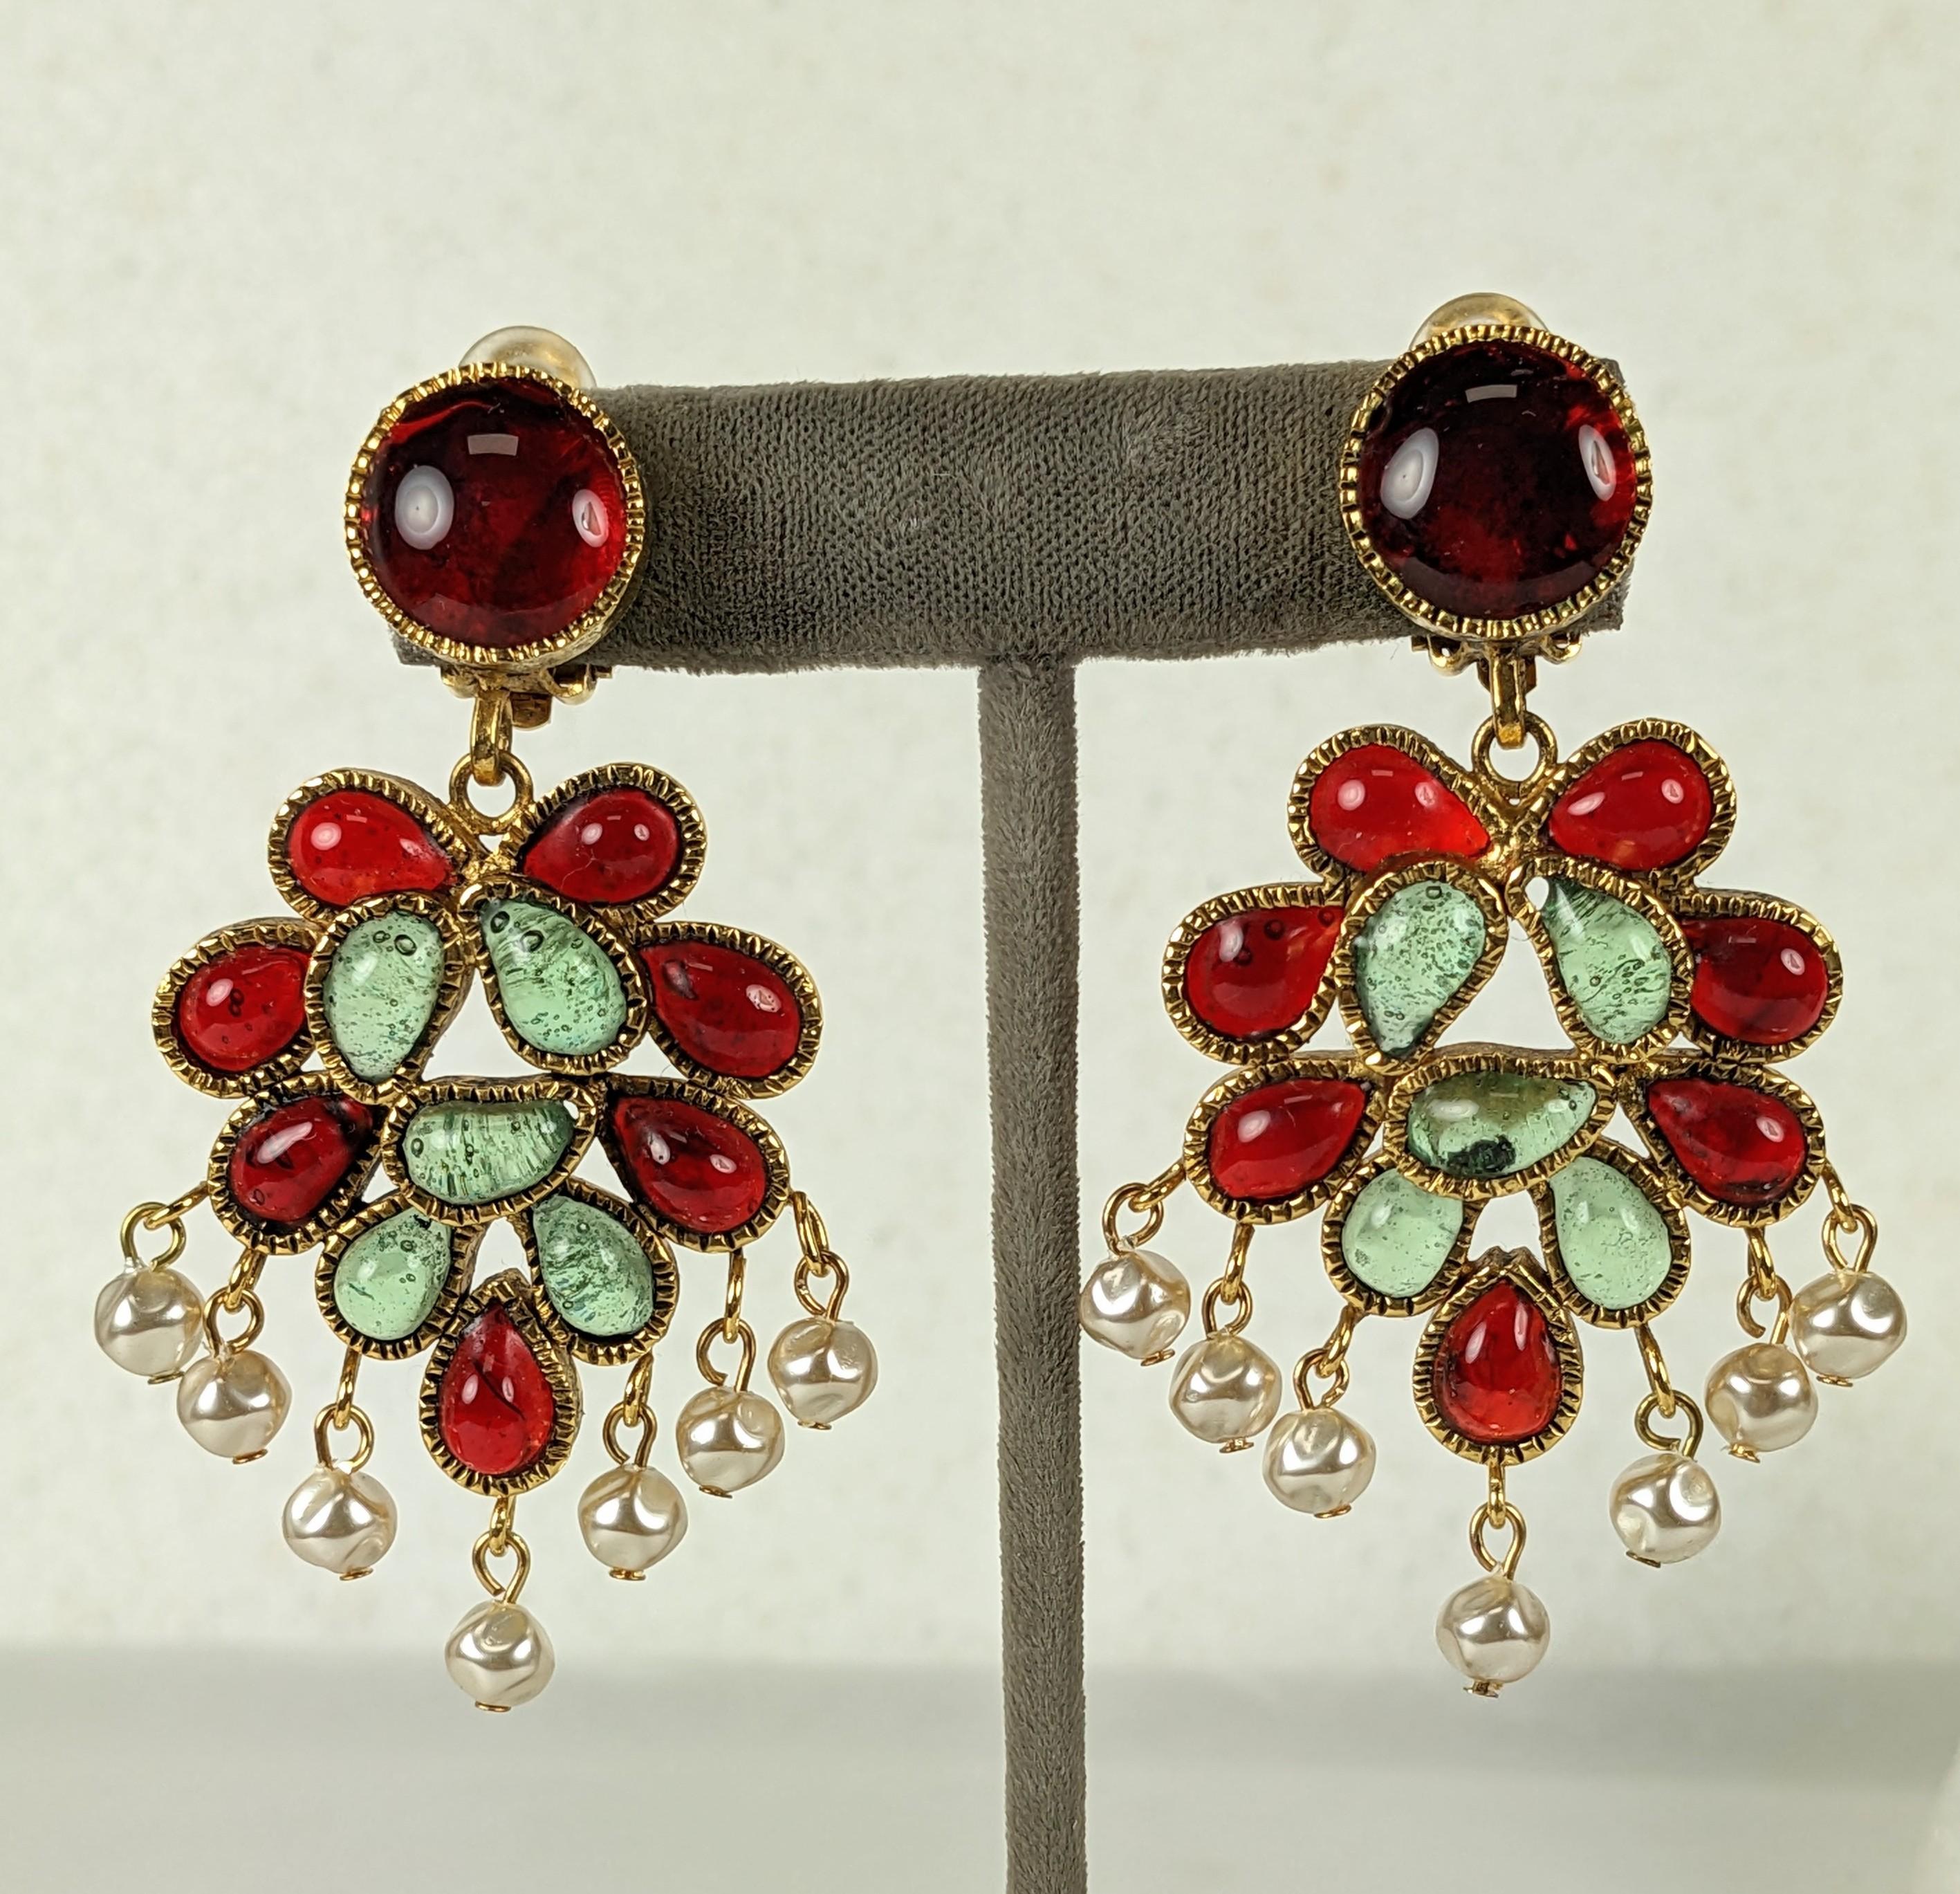 Elegant Chanel Anglo Indian Moghul Earrings from the 1990's made by Maison Gripoix. Dimensional design with hand poured glass in pale emerald and deep ruby to mimic gemstones, with faux baroque pearl drops. Chanel no longer produces these handmade